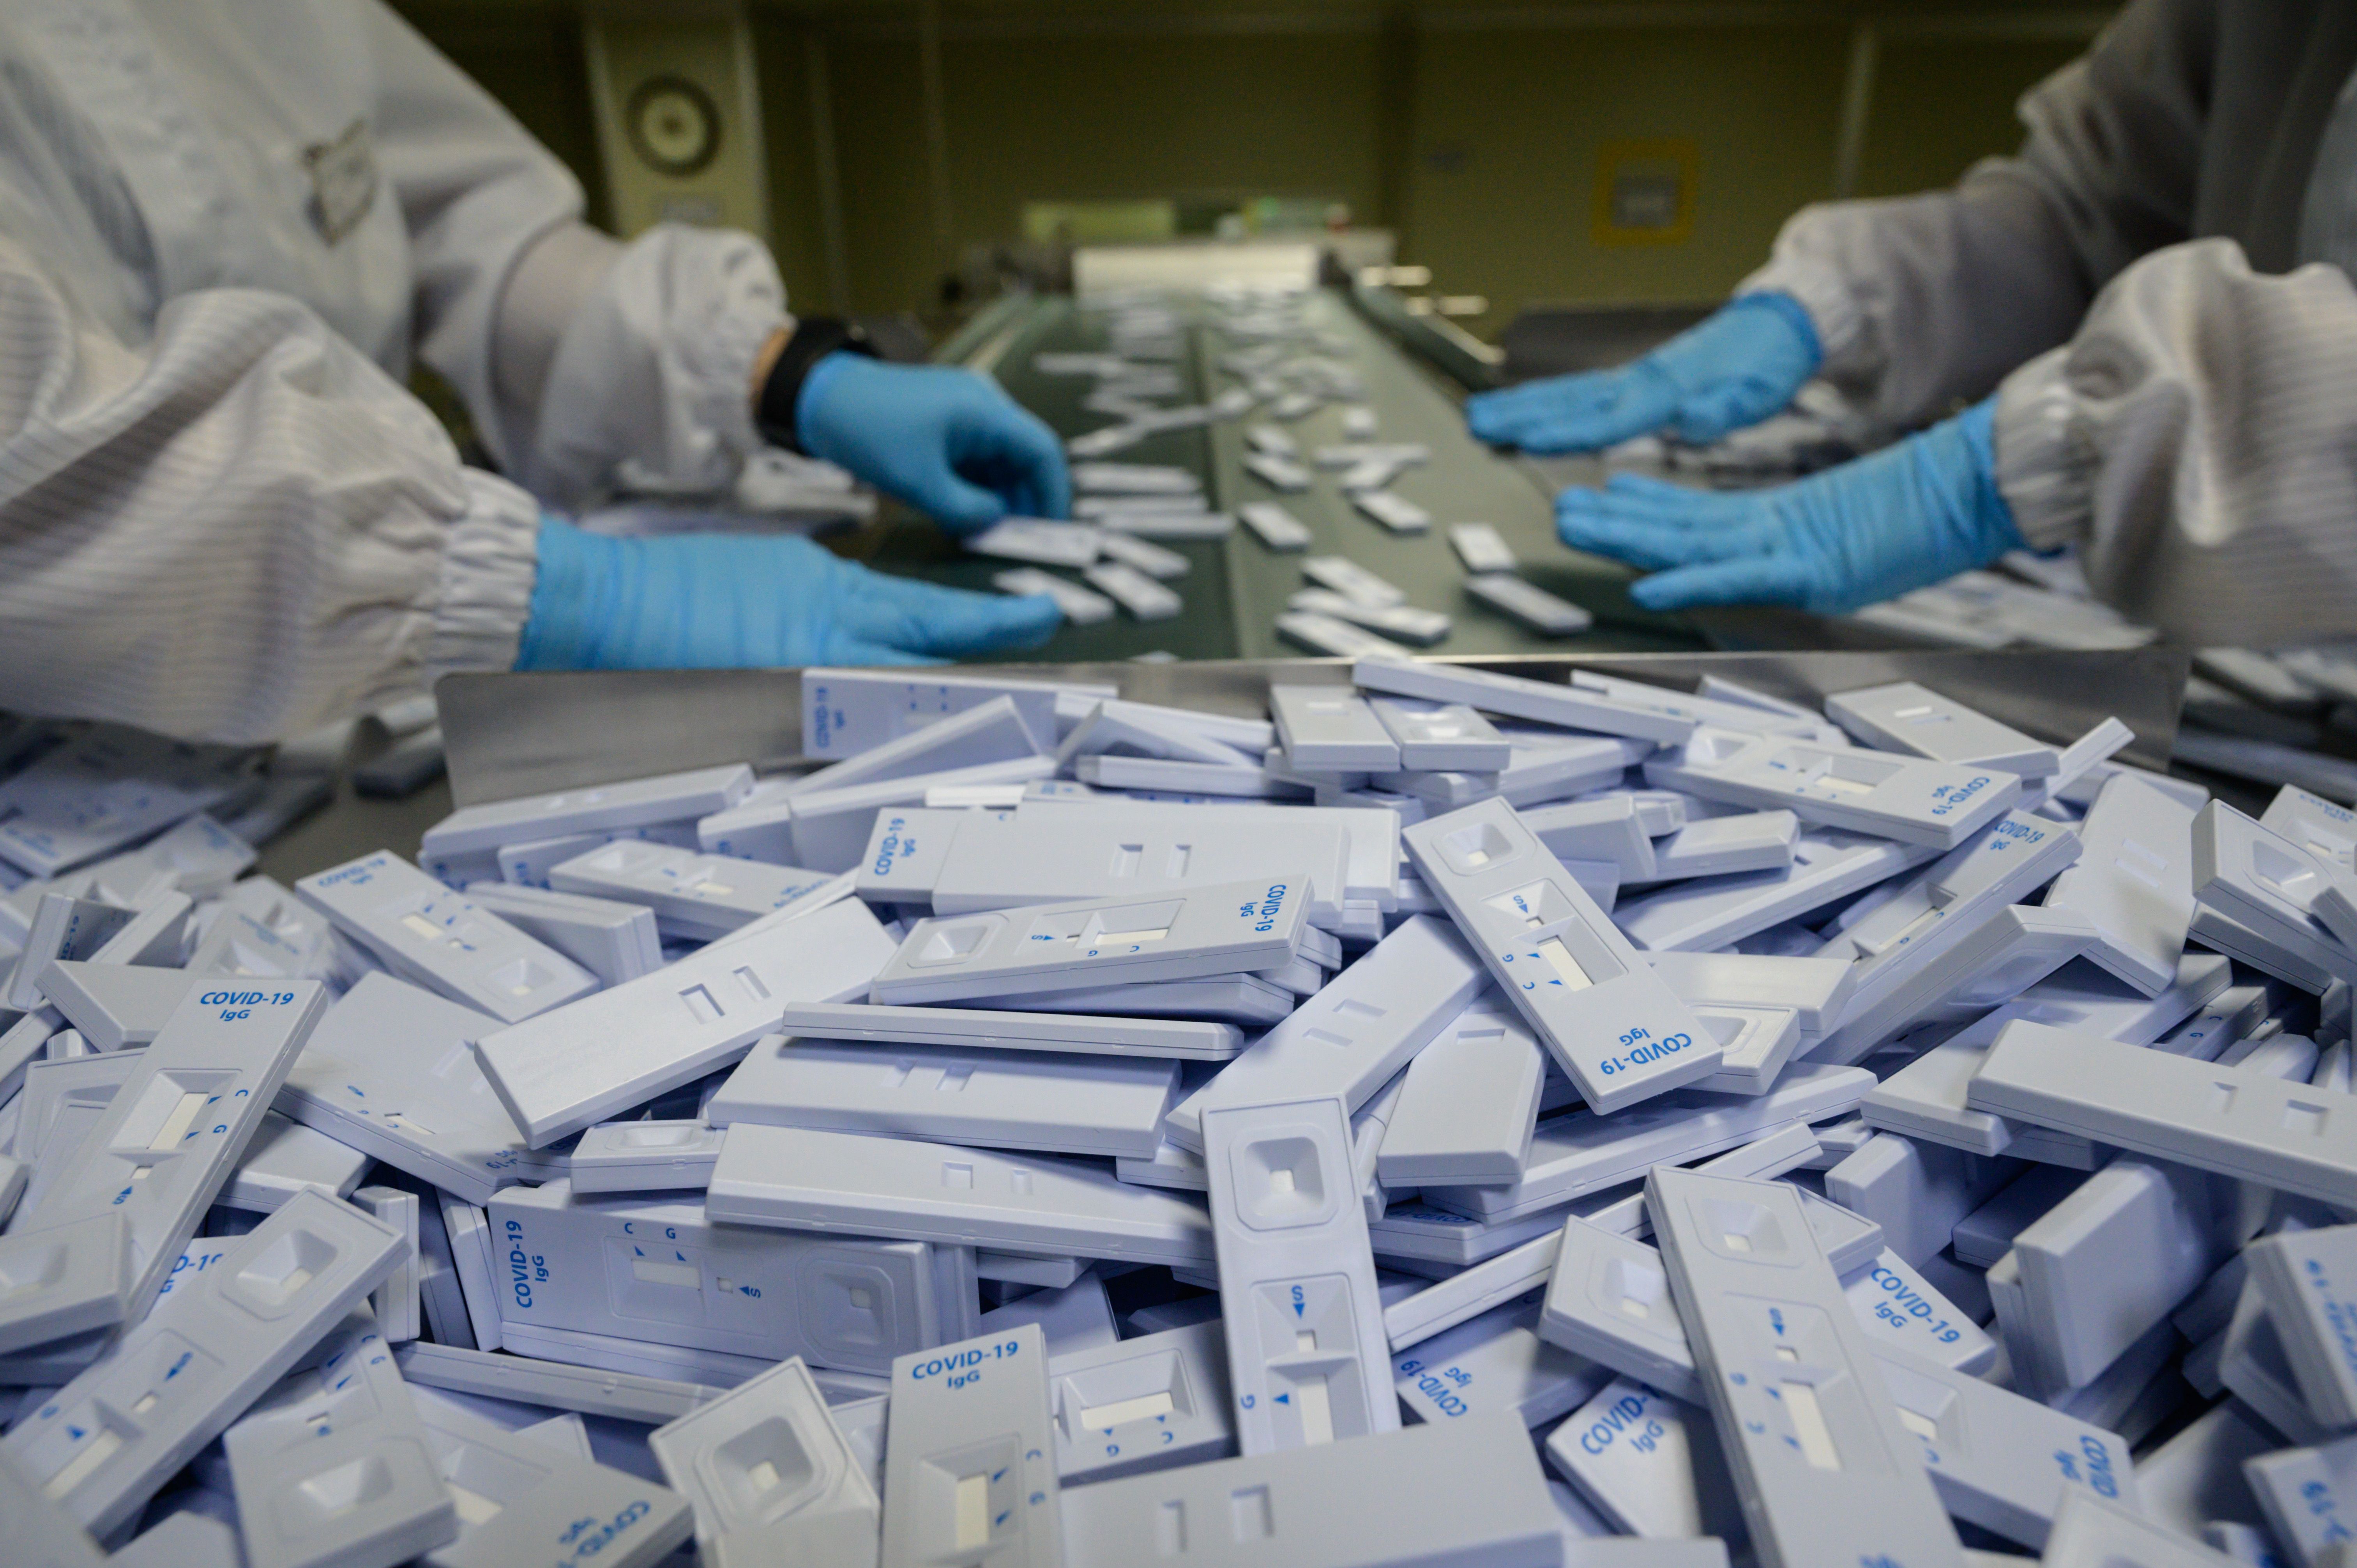 Sample testing devices used in diagnosing the COVID-19 novel coronavirus. (Photo by ED JONES/AFP via Getty Images)